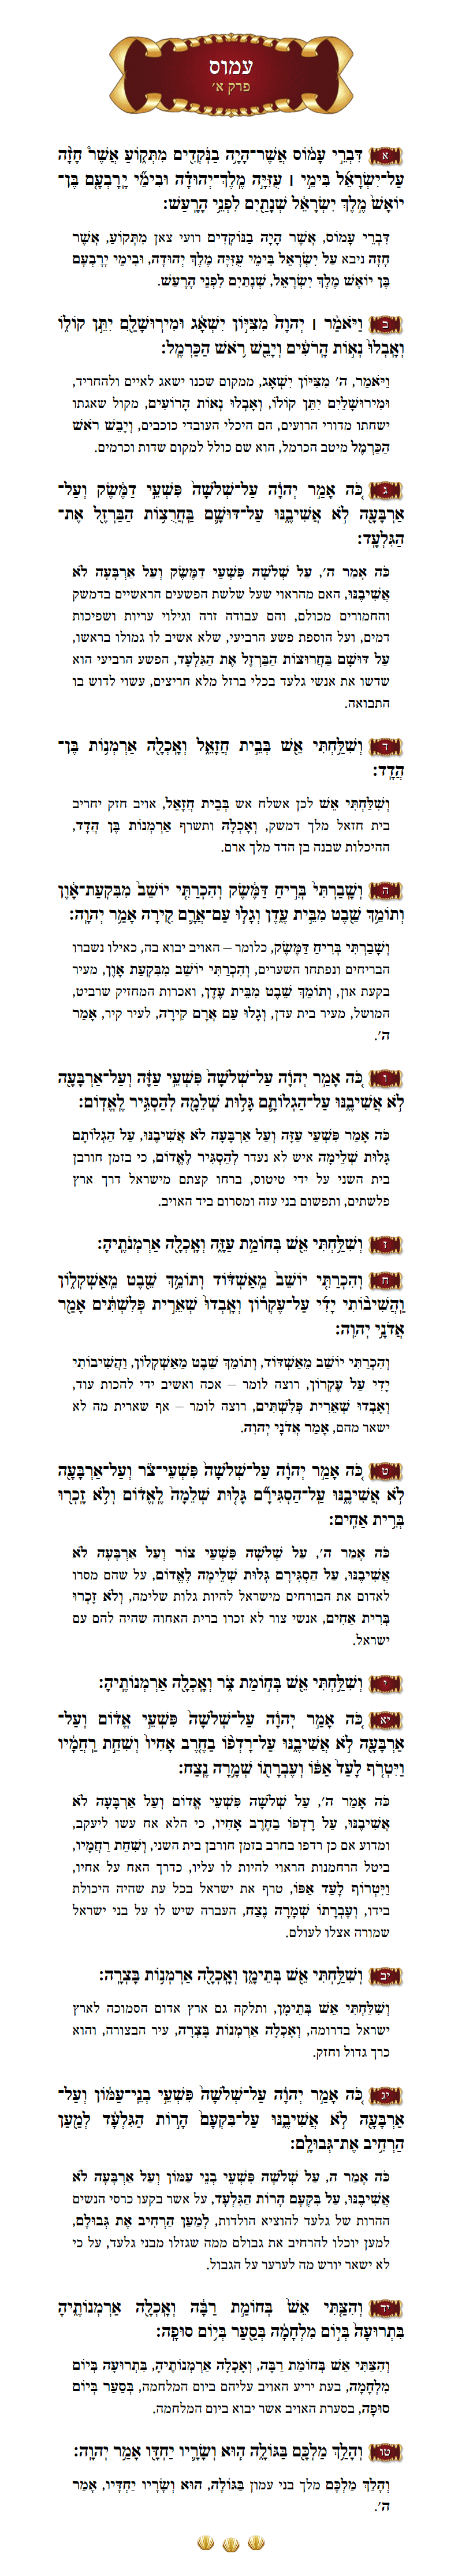 Sefer Amos Chapter 1 with commentary